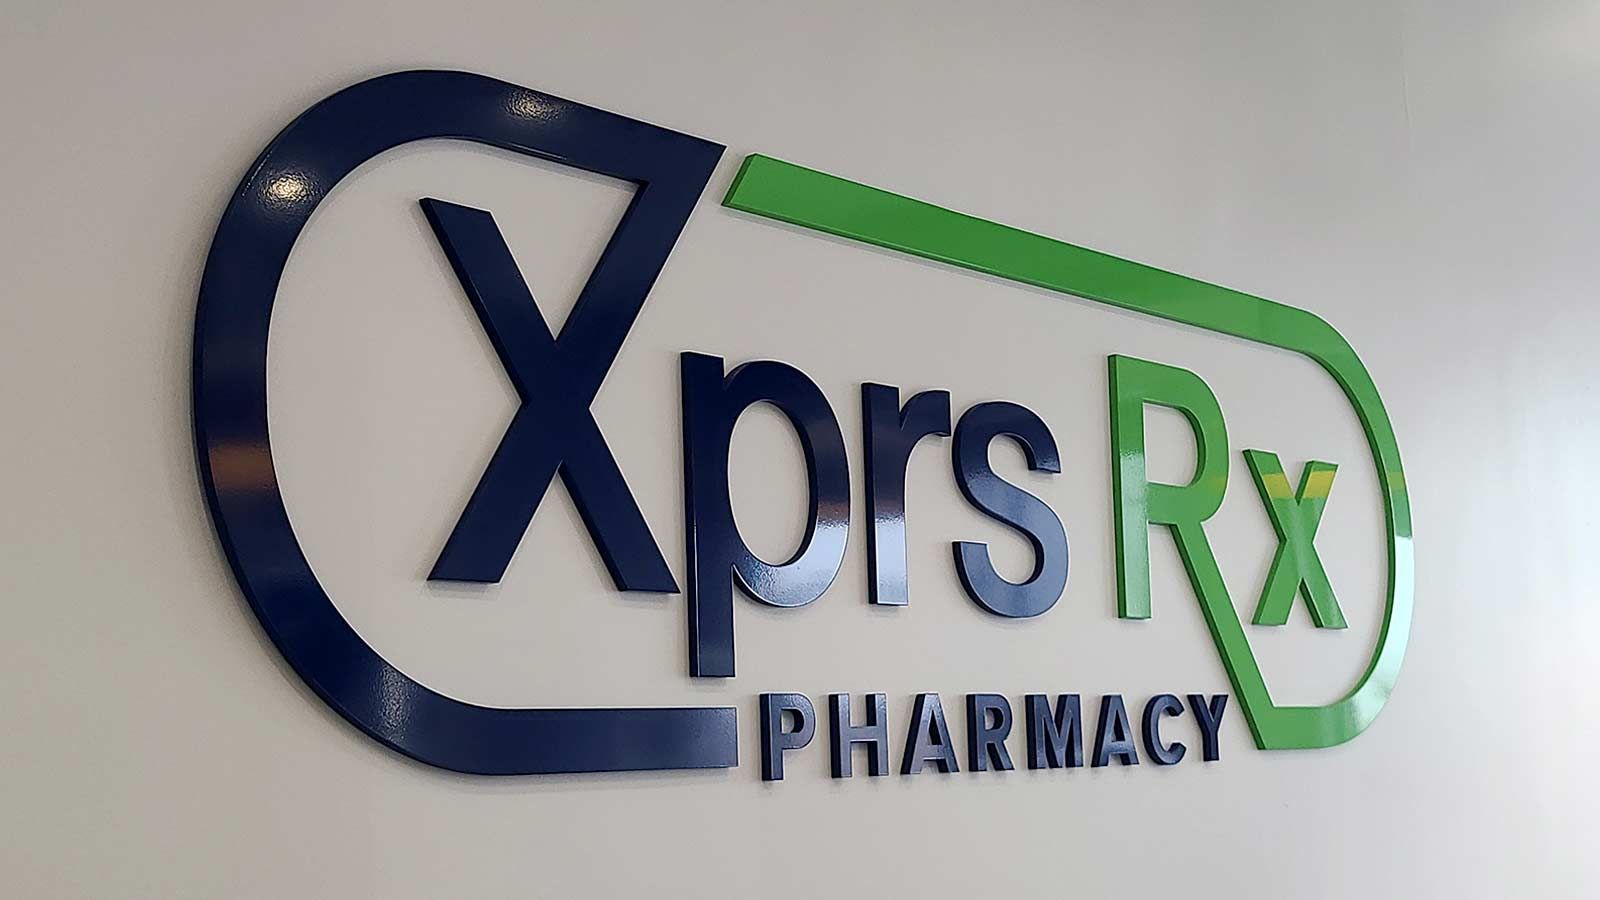 XPRS Rx Pharmacy logo sign attached to the wall